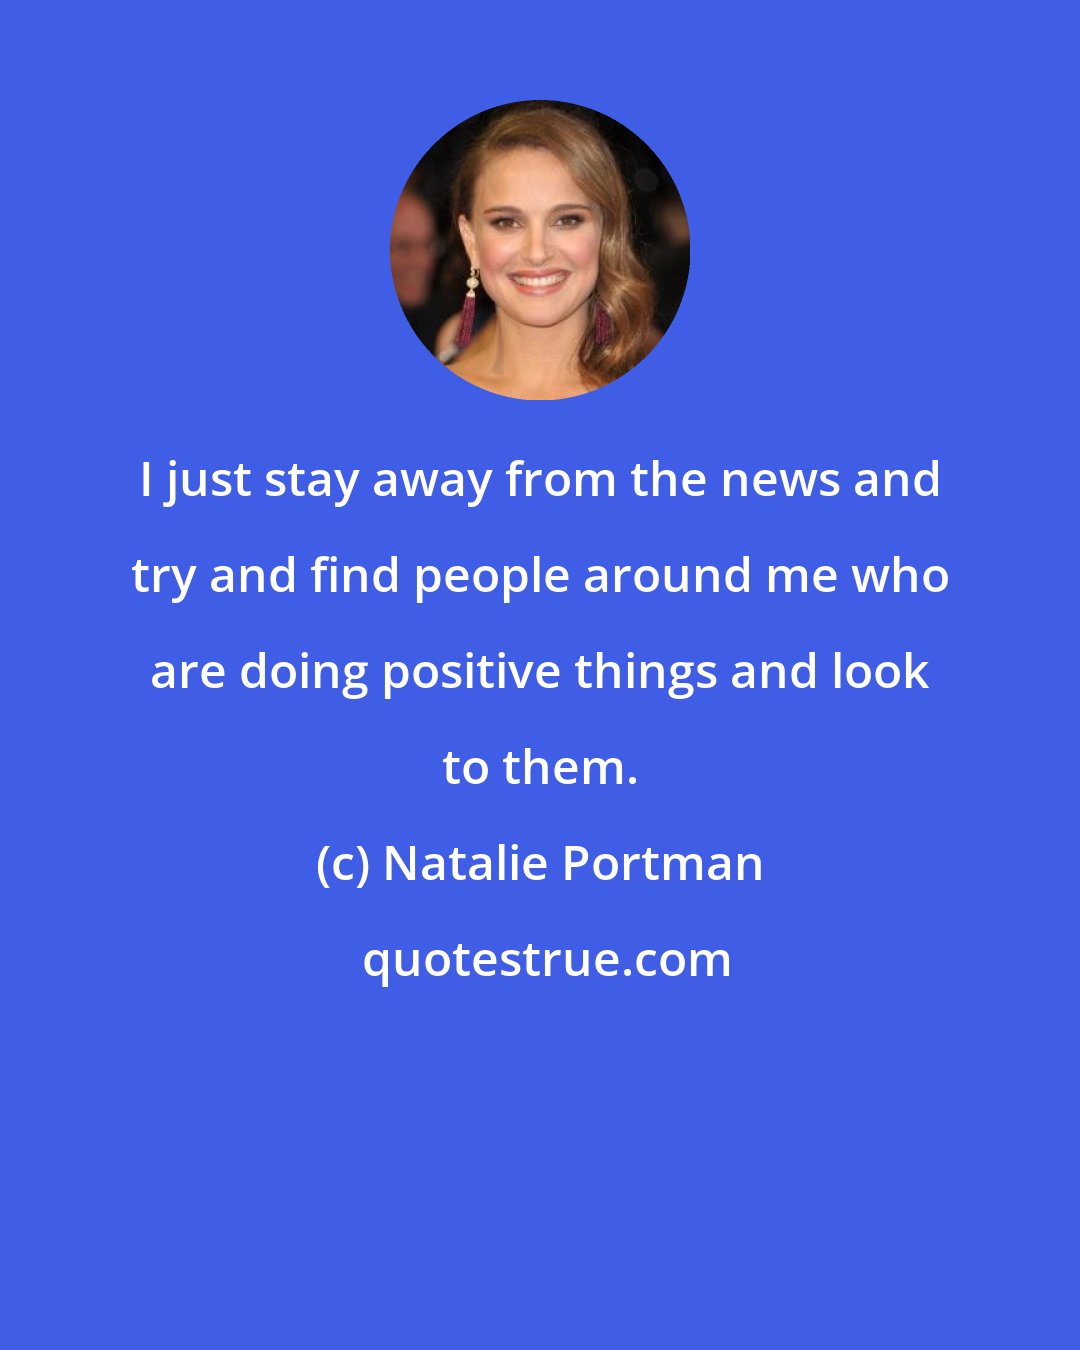 Natalie Portman: I just stay away from the news and try and find people around me who are doing positive things and look to them.